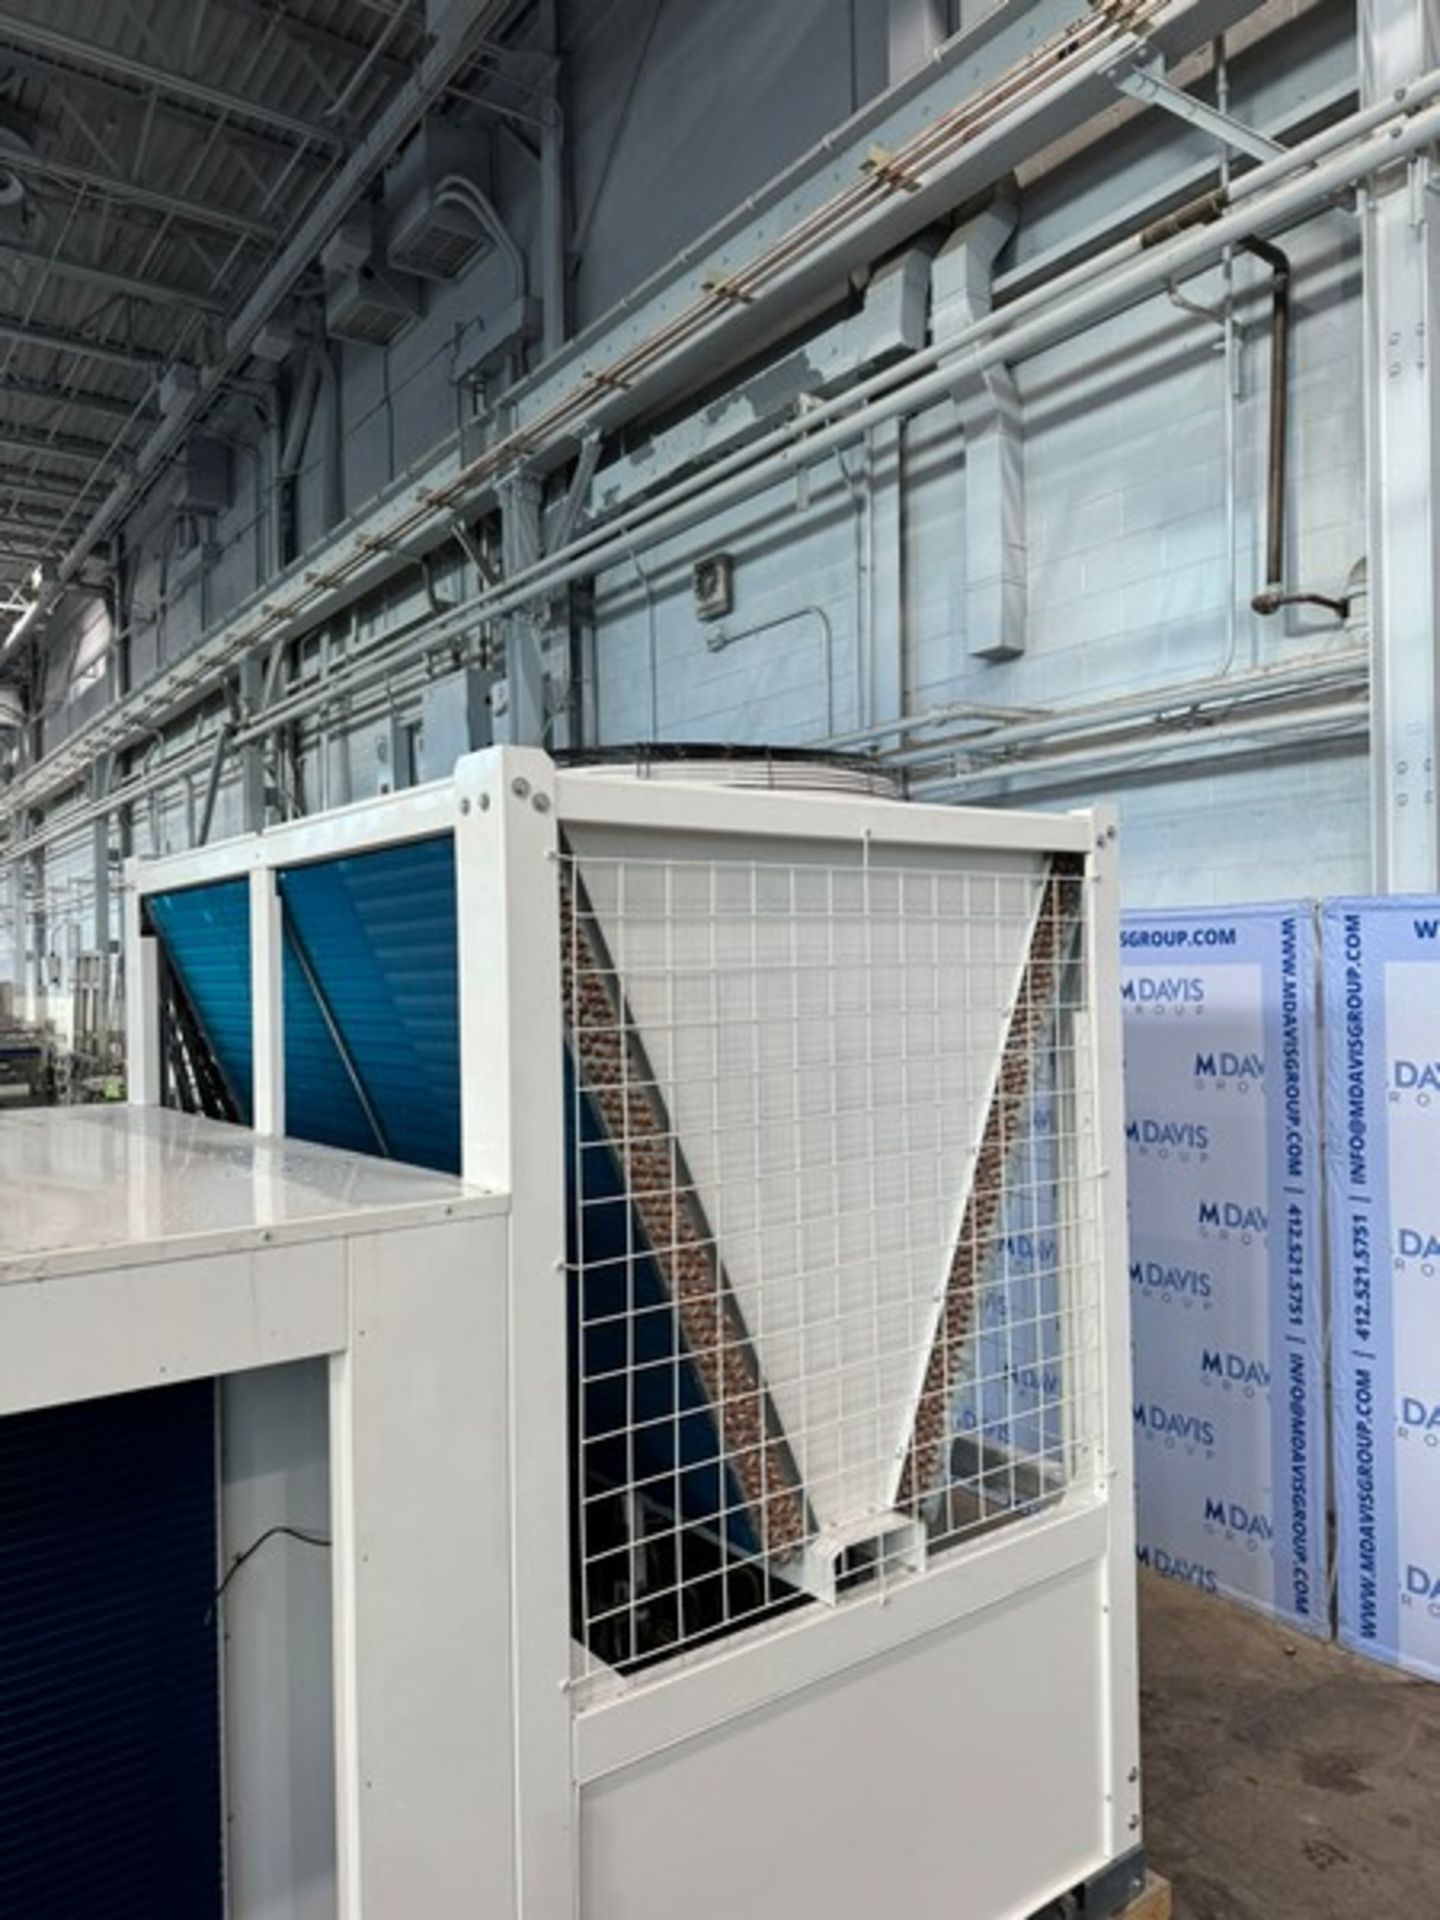 NEW 2022 SHENHLIN Roof Mounted Air Cooled Package Unit, S/N C5020221018R002, Cooling Capacity: 140.2 - Image 14 of 17